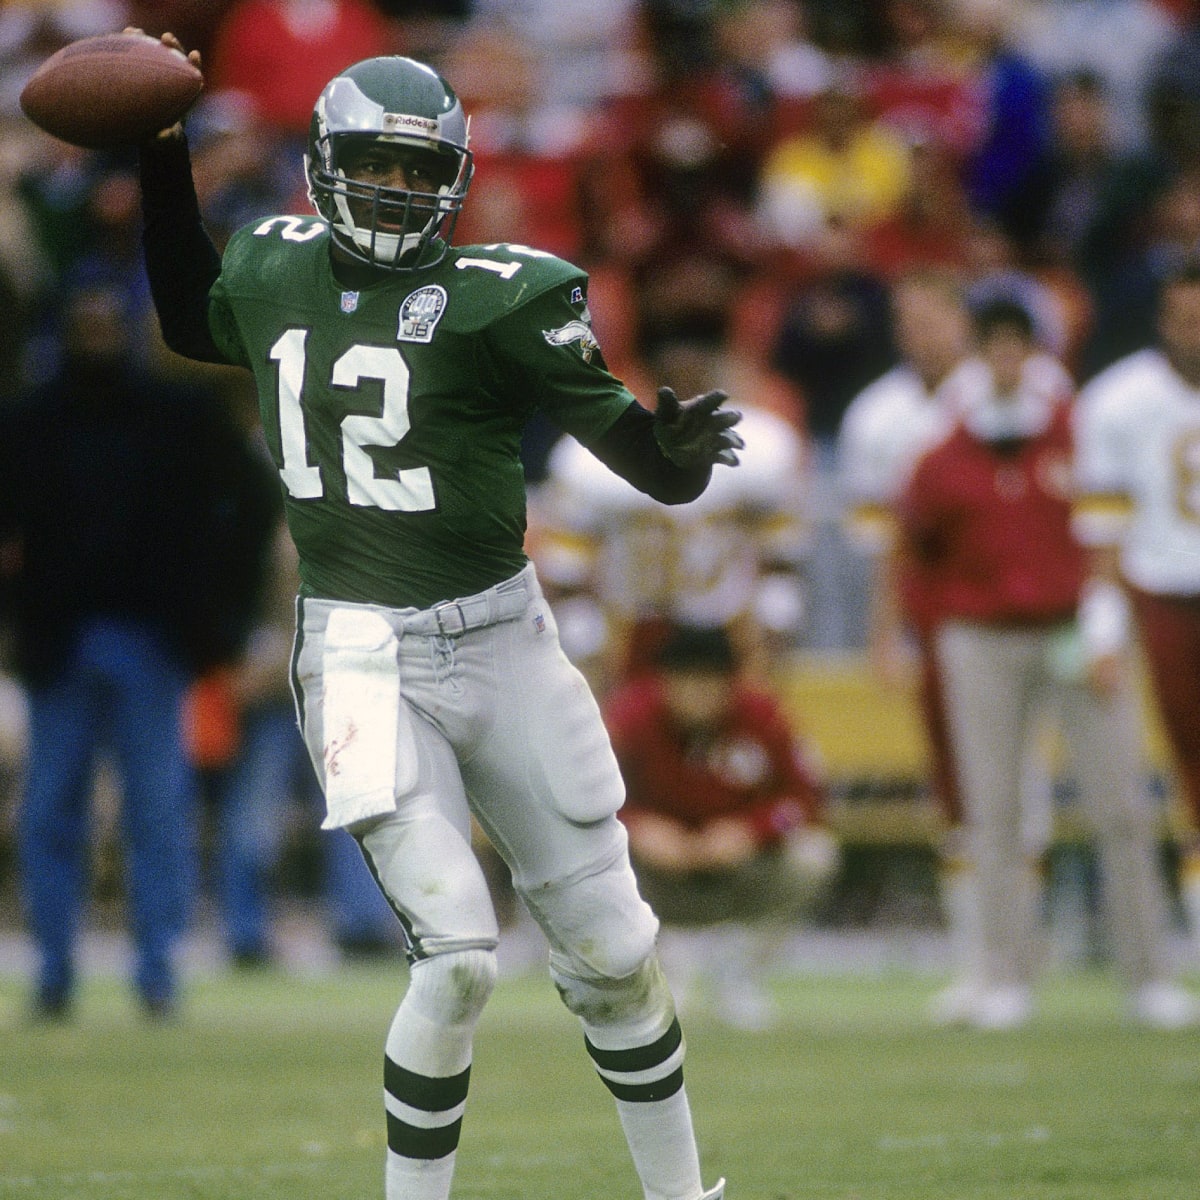 Eagles trying to bring back kelly green jerseys for 2020 uniforms